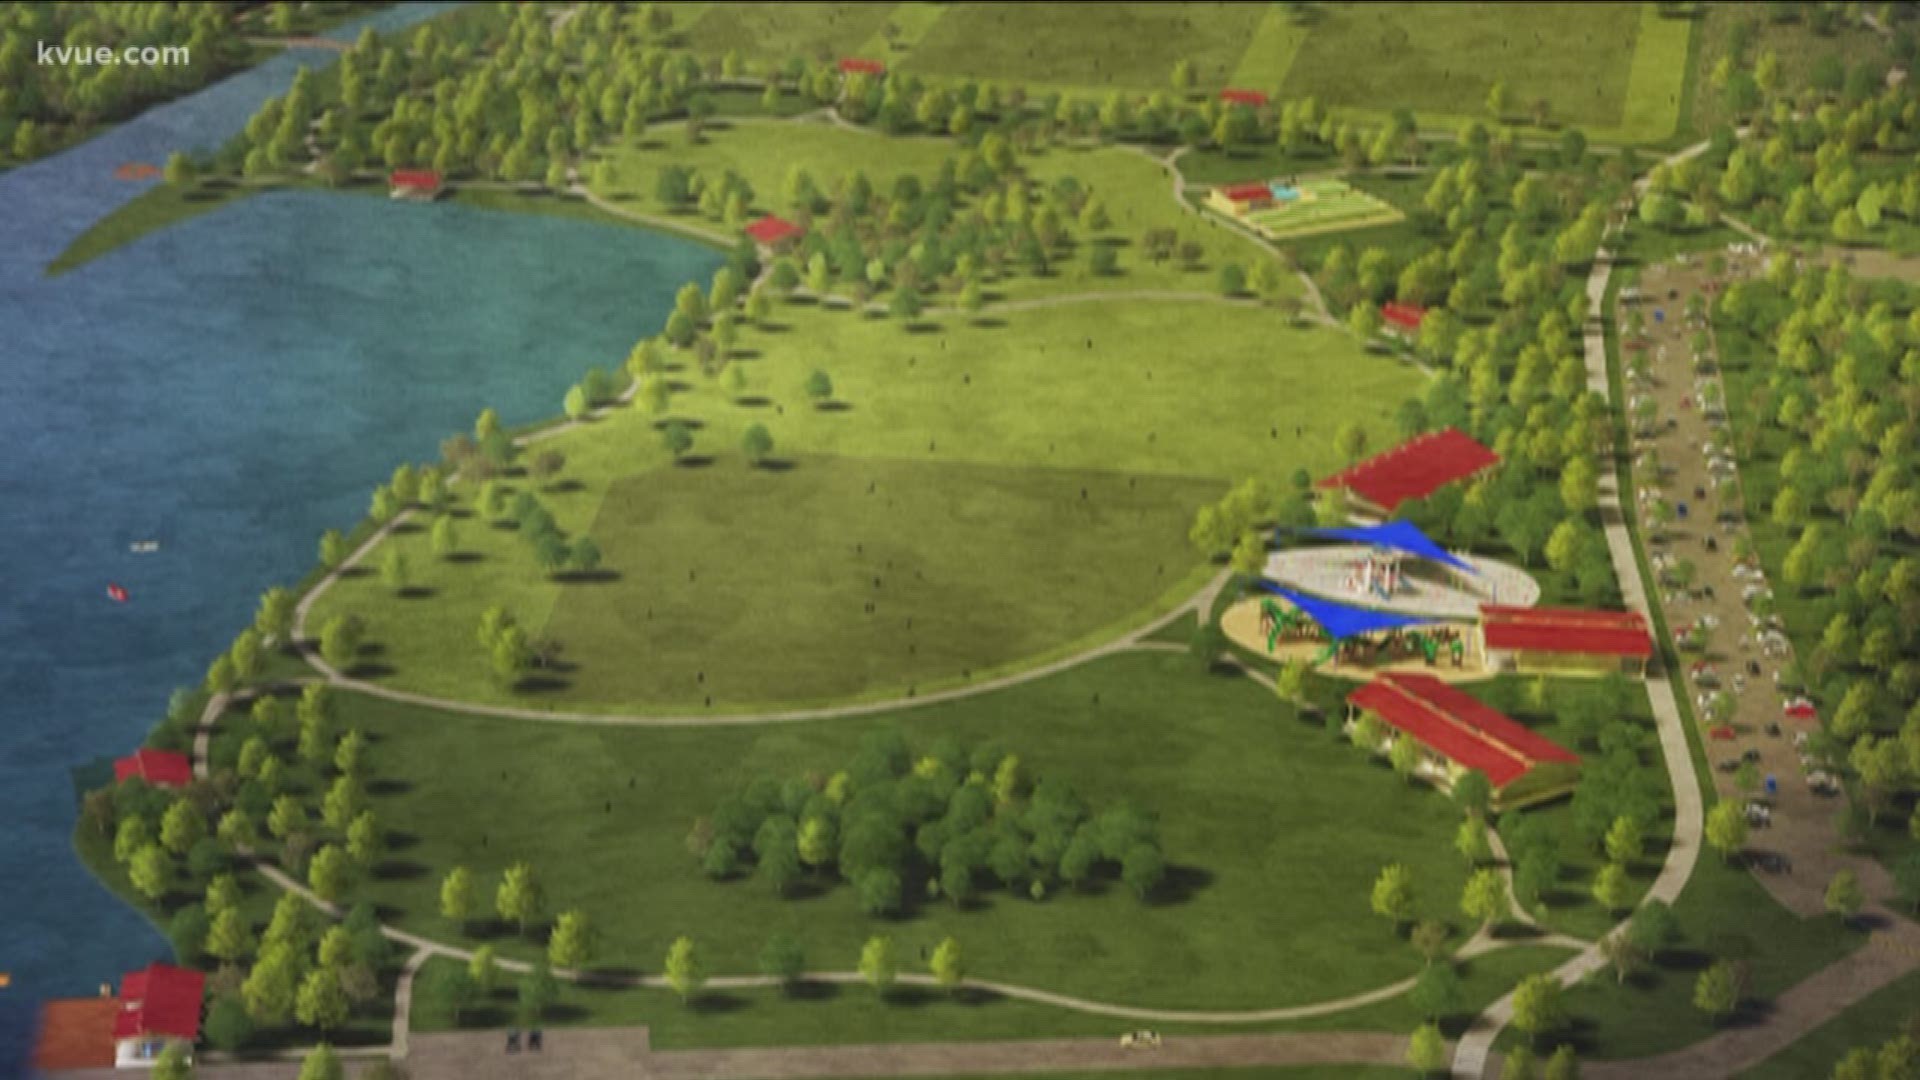 Plans for a big new park in Williamson County are expanding.